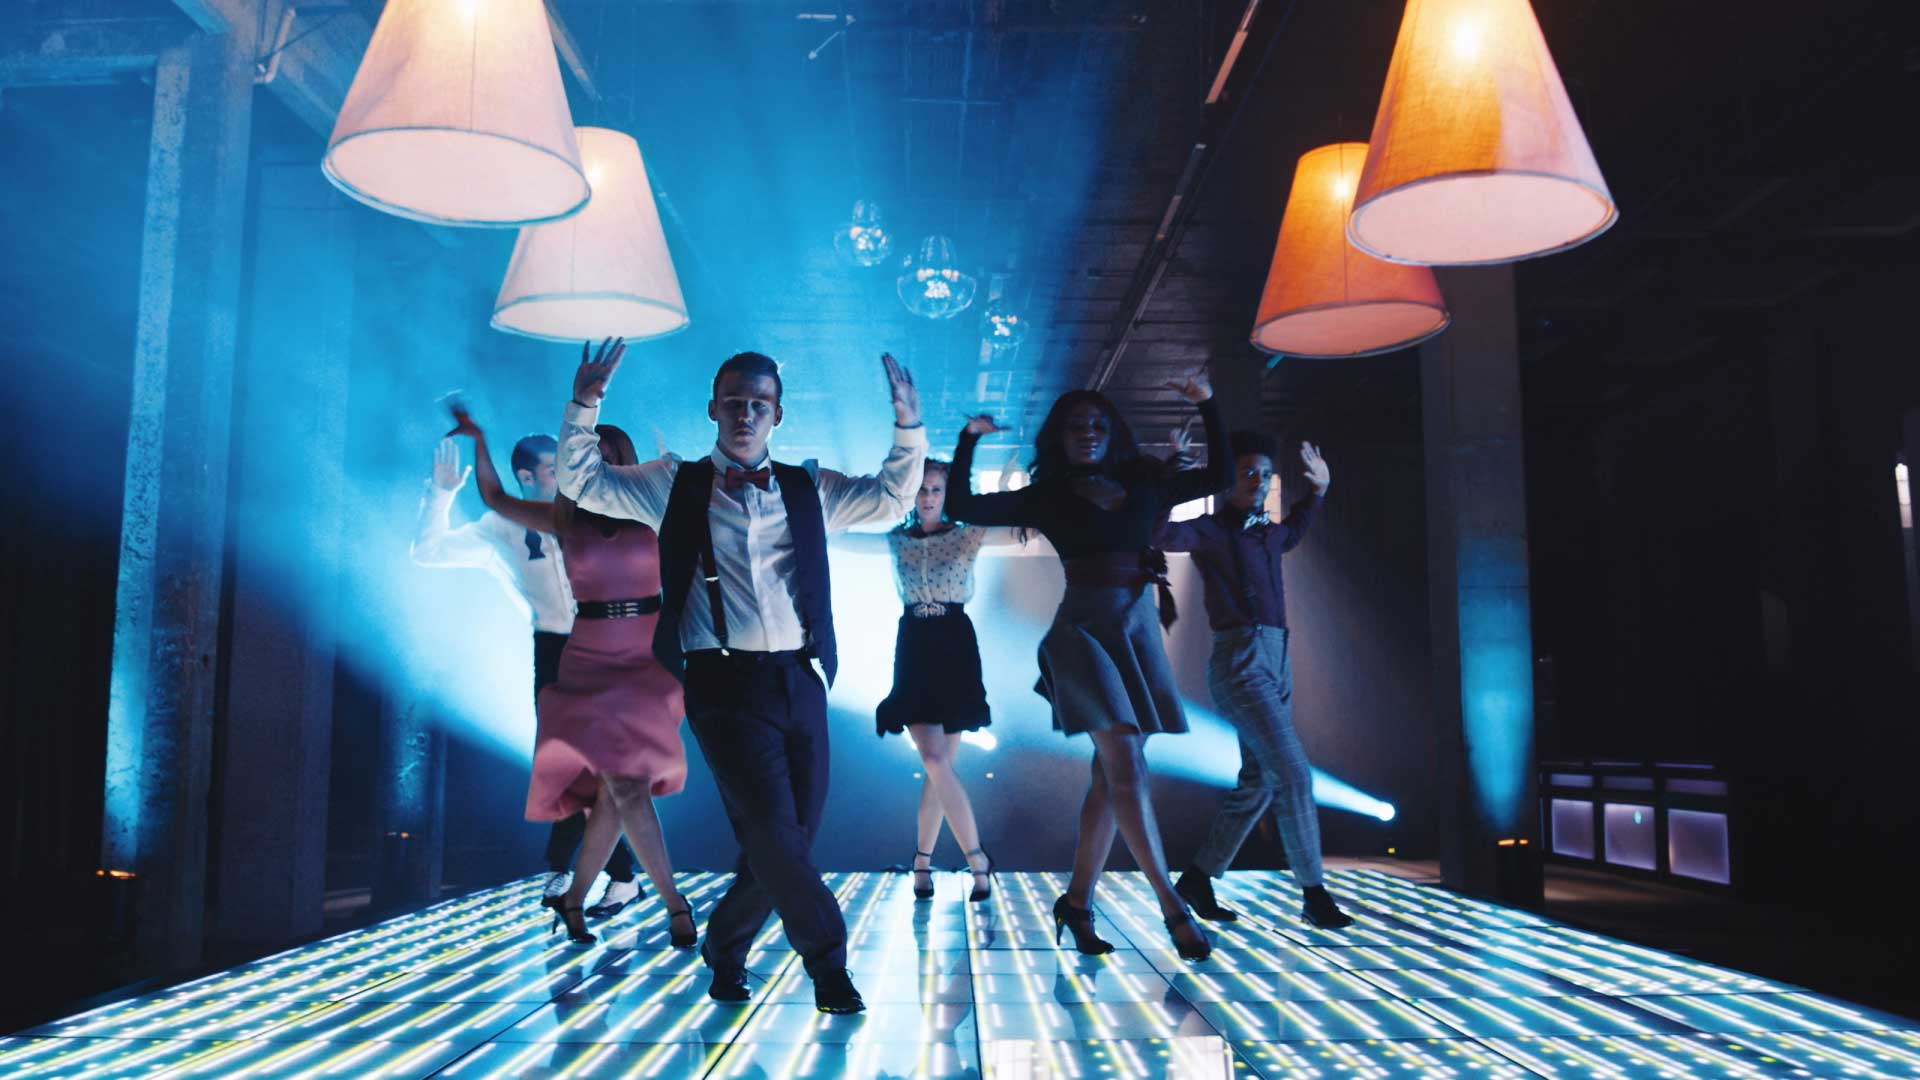 Dancing on stage. Still from Toyota Yaris commercial.